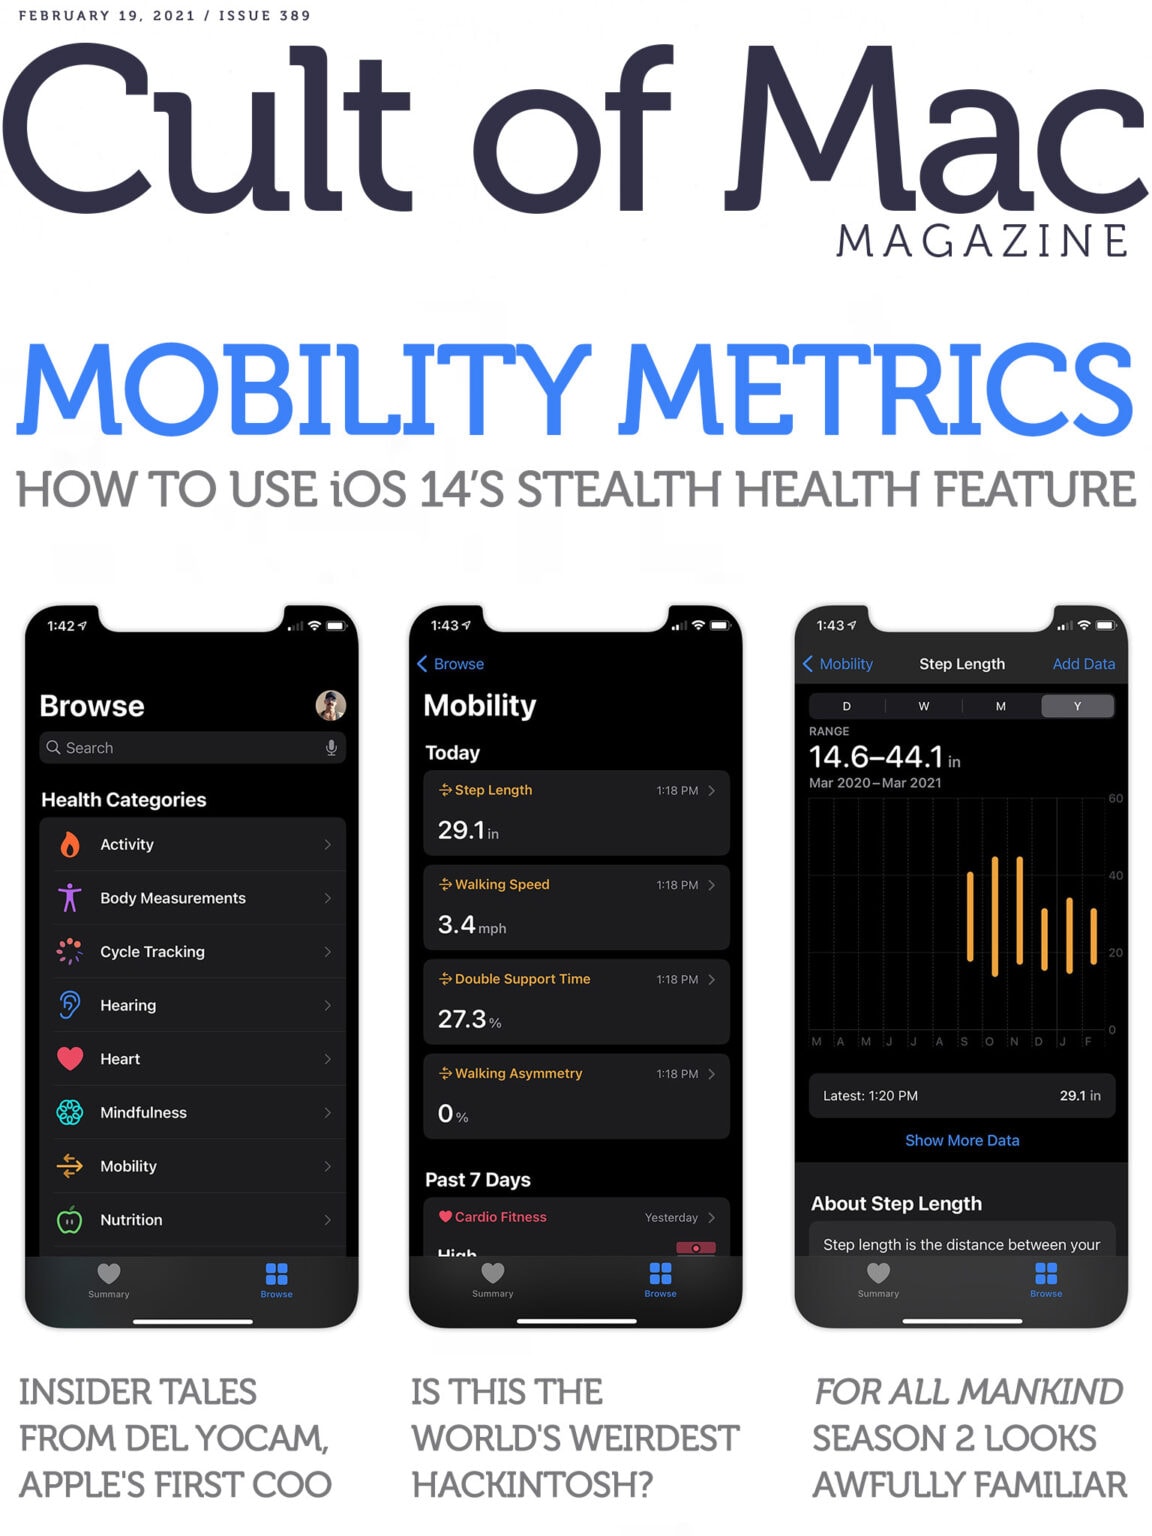 Learn to use Mobility Metrics, the iPhone's stealth fitness feature.